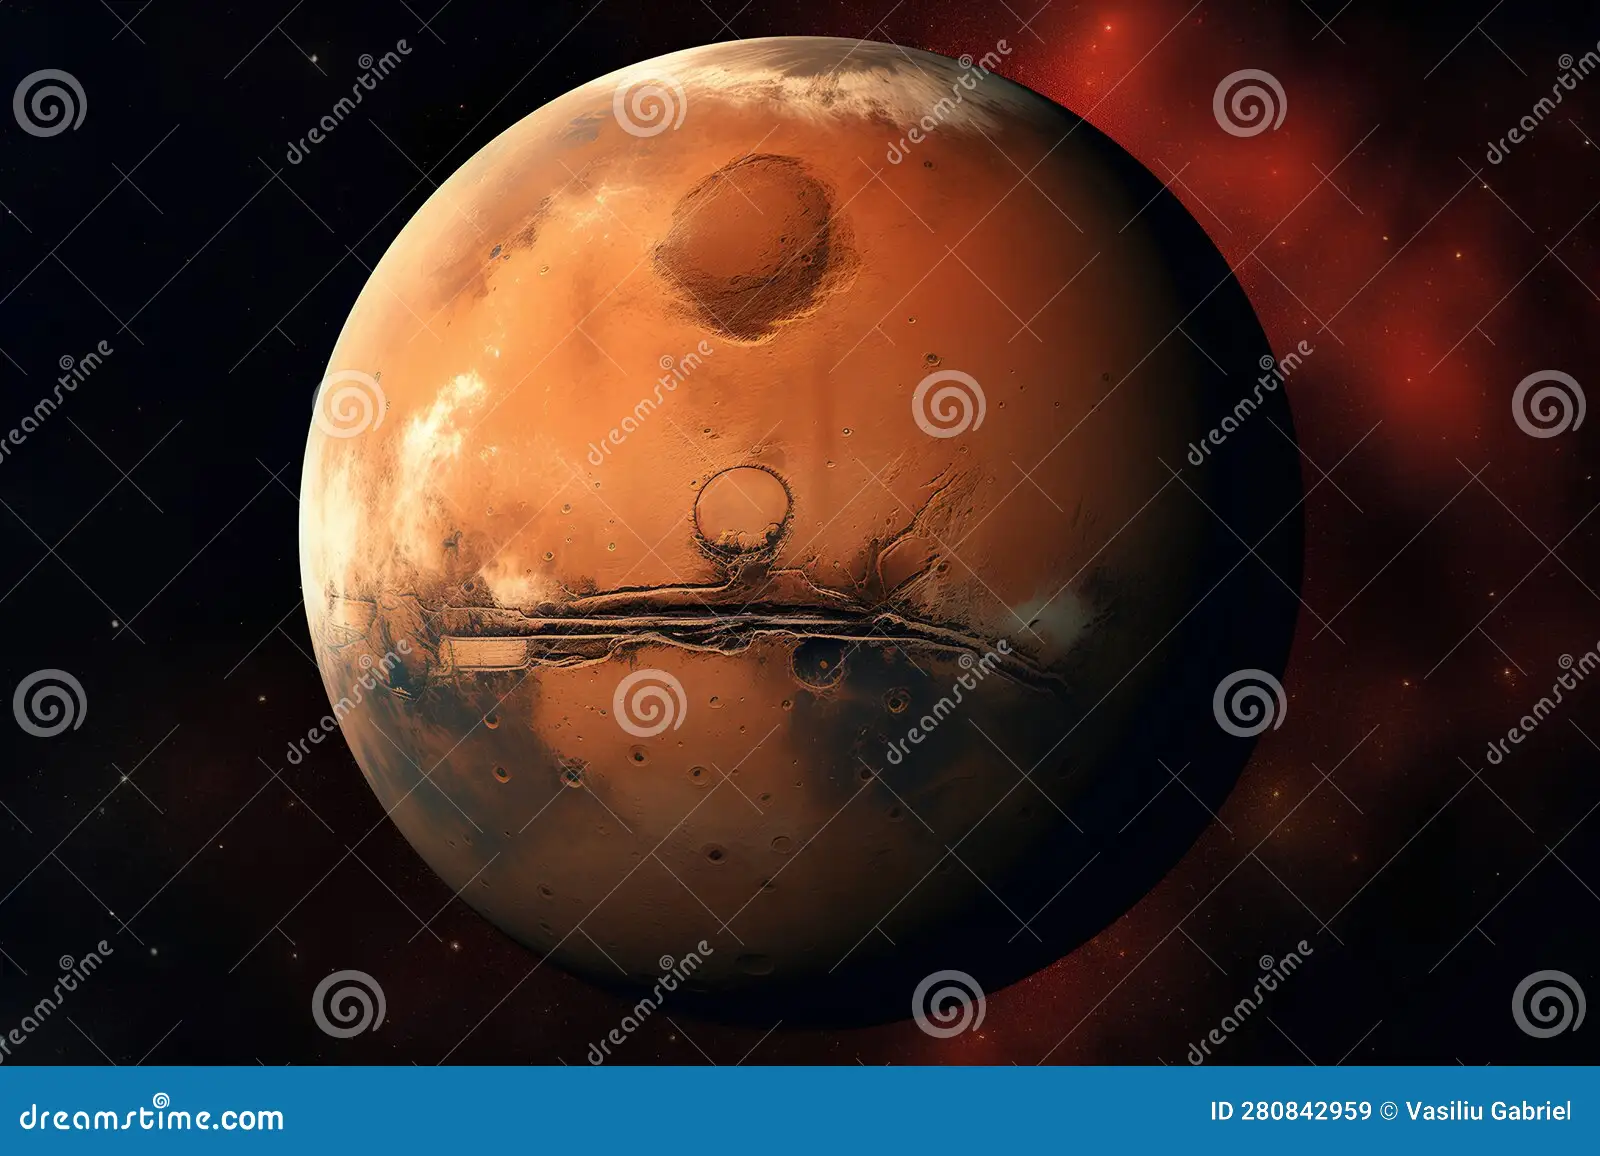 The new red planet in the universe